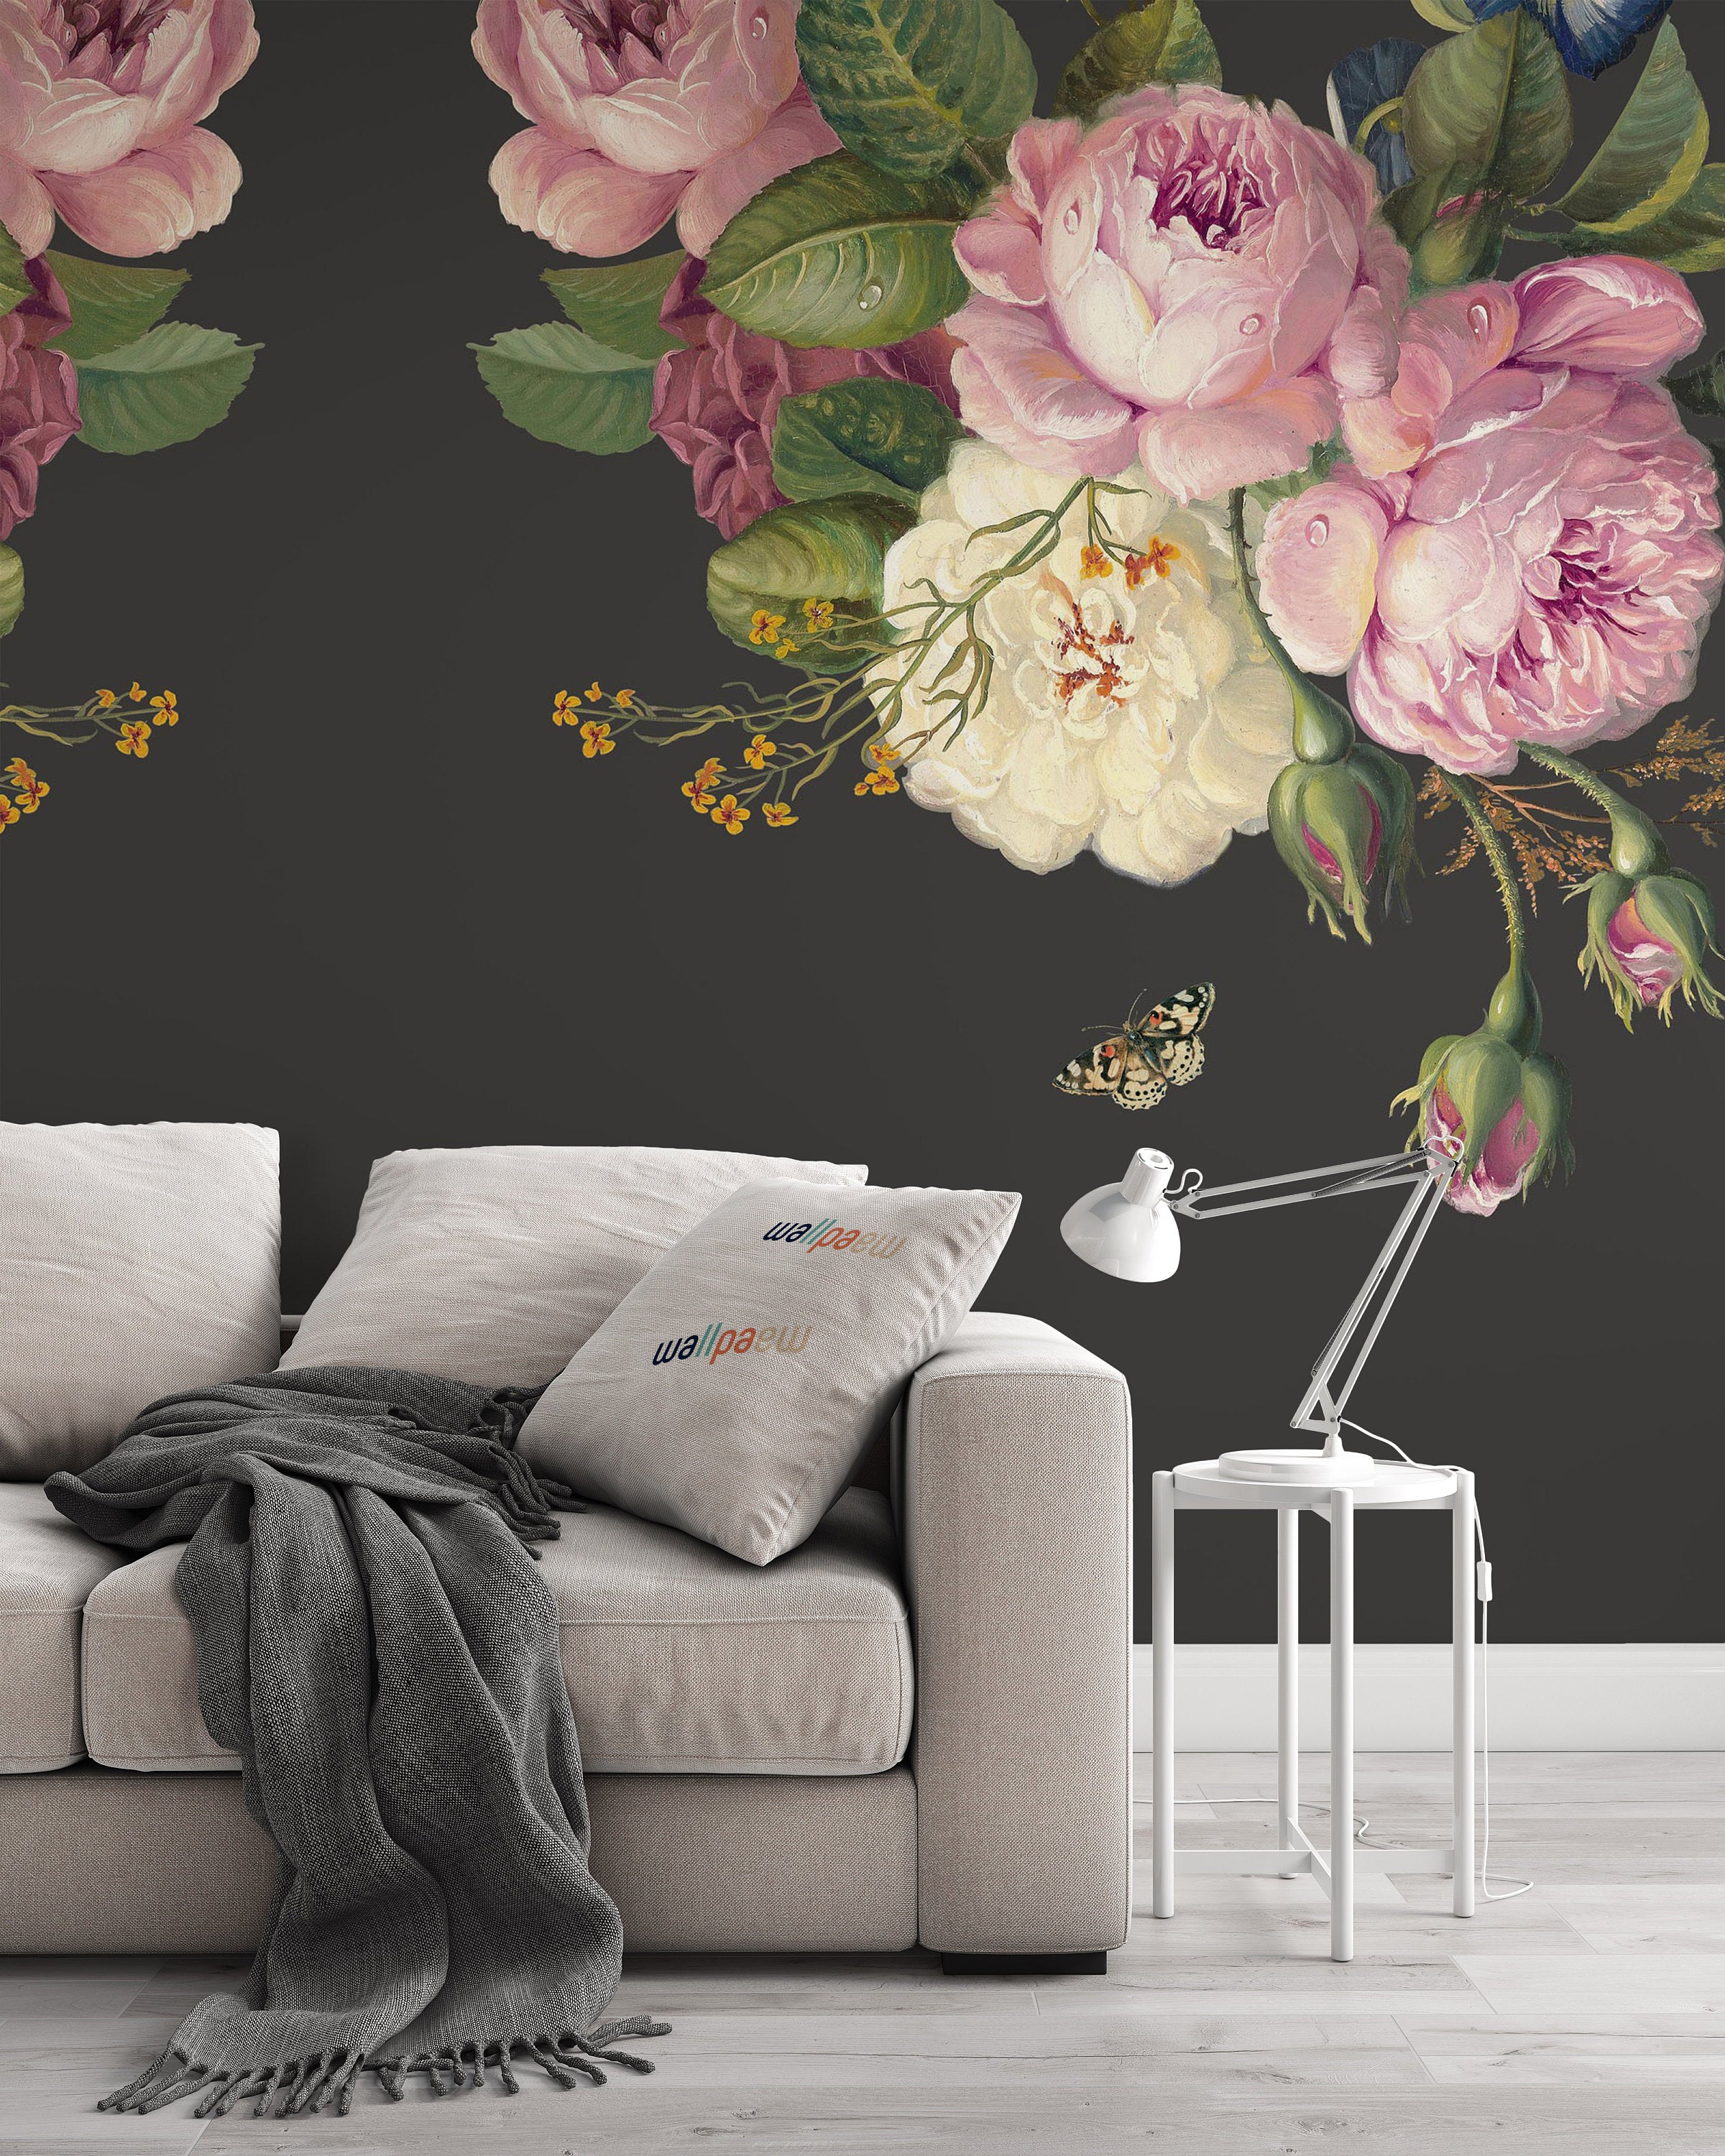 Colorful Roses and Flowers Leaves On The Dark Background Wallpaper Self Adhesive Peel and Stick Wall Sticker Wall Decoration Removable